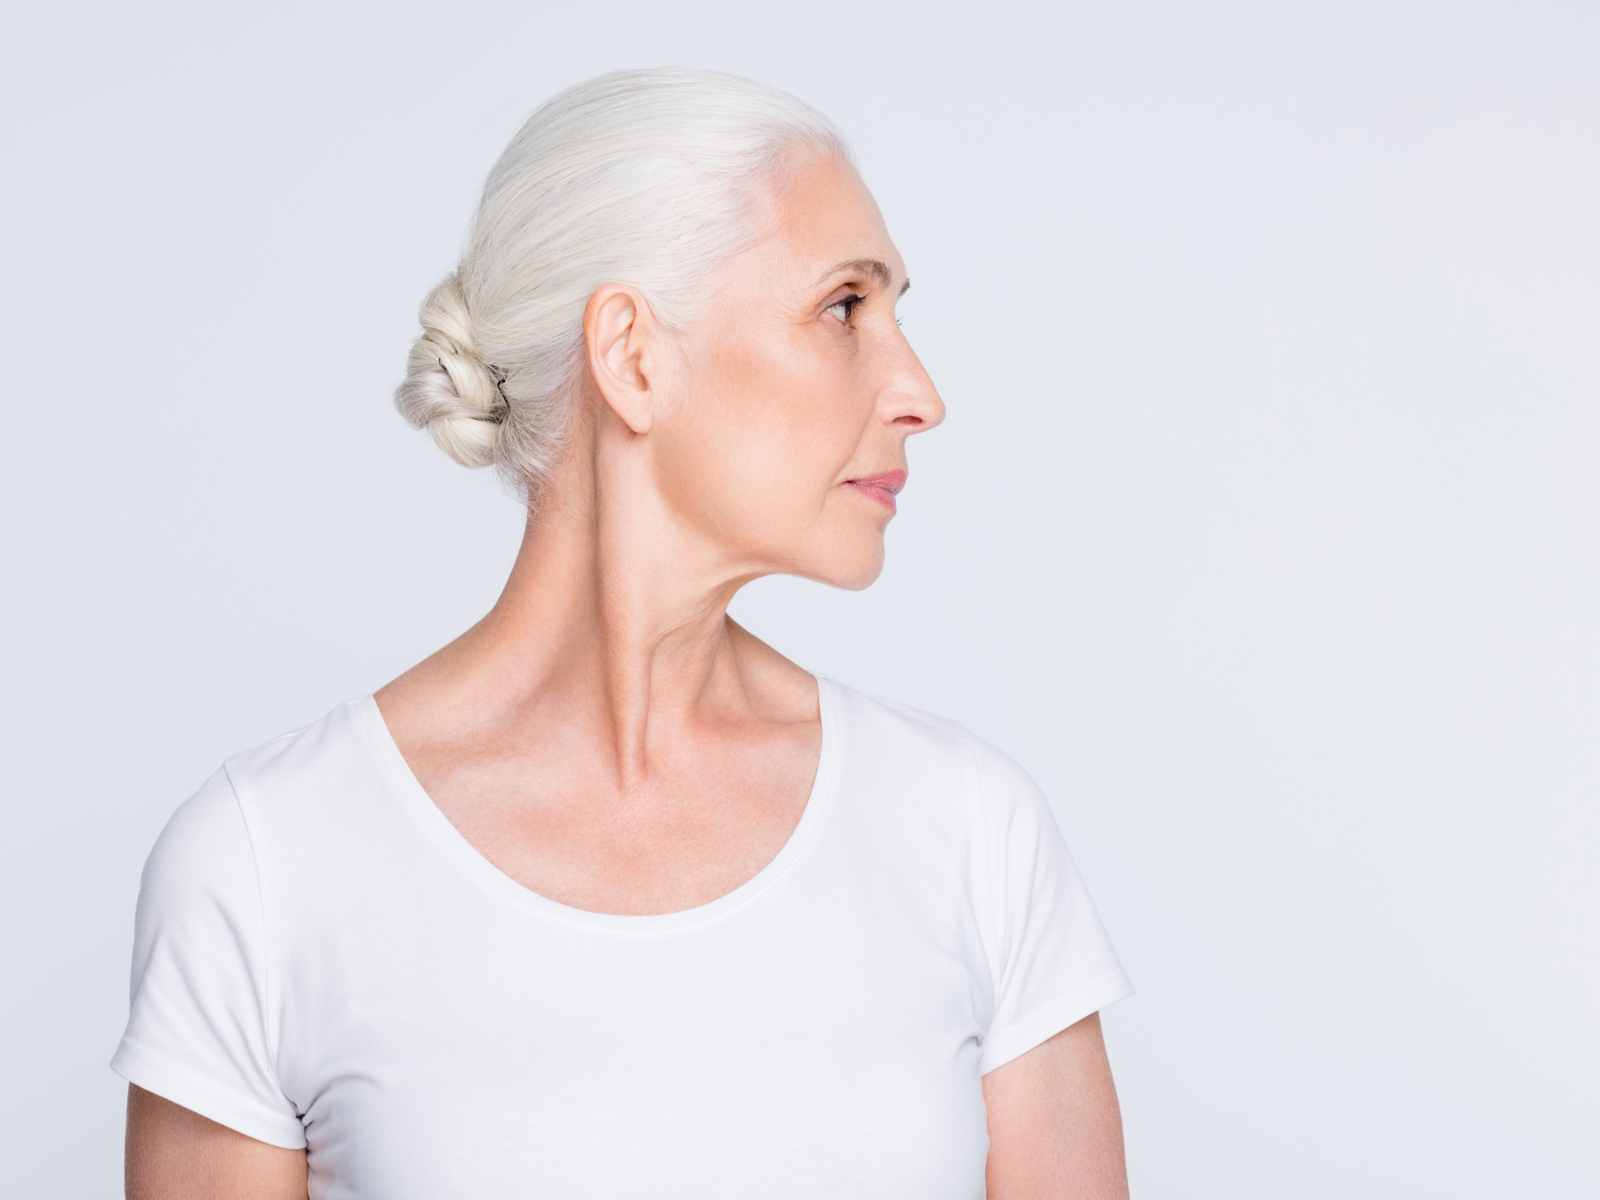 The 20 Best Hairstyles for Women Over 70 in 2023